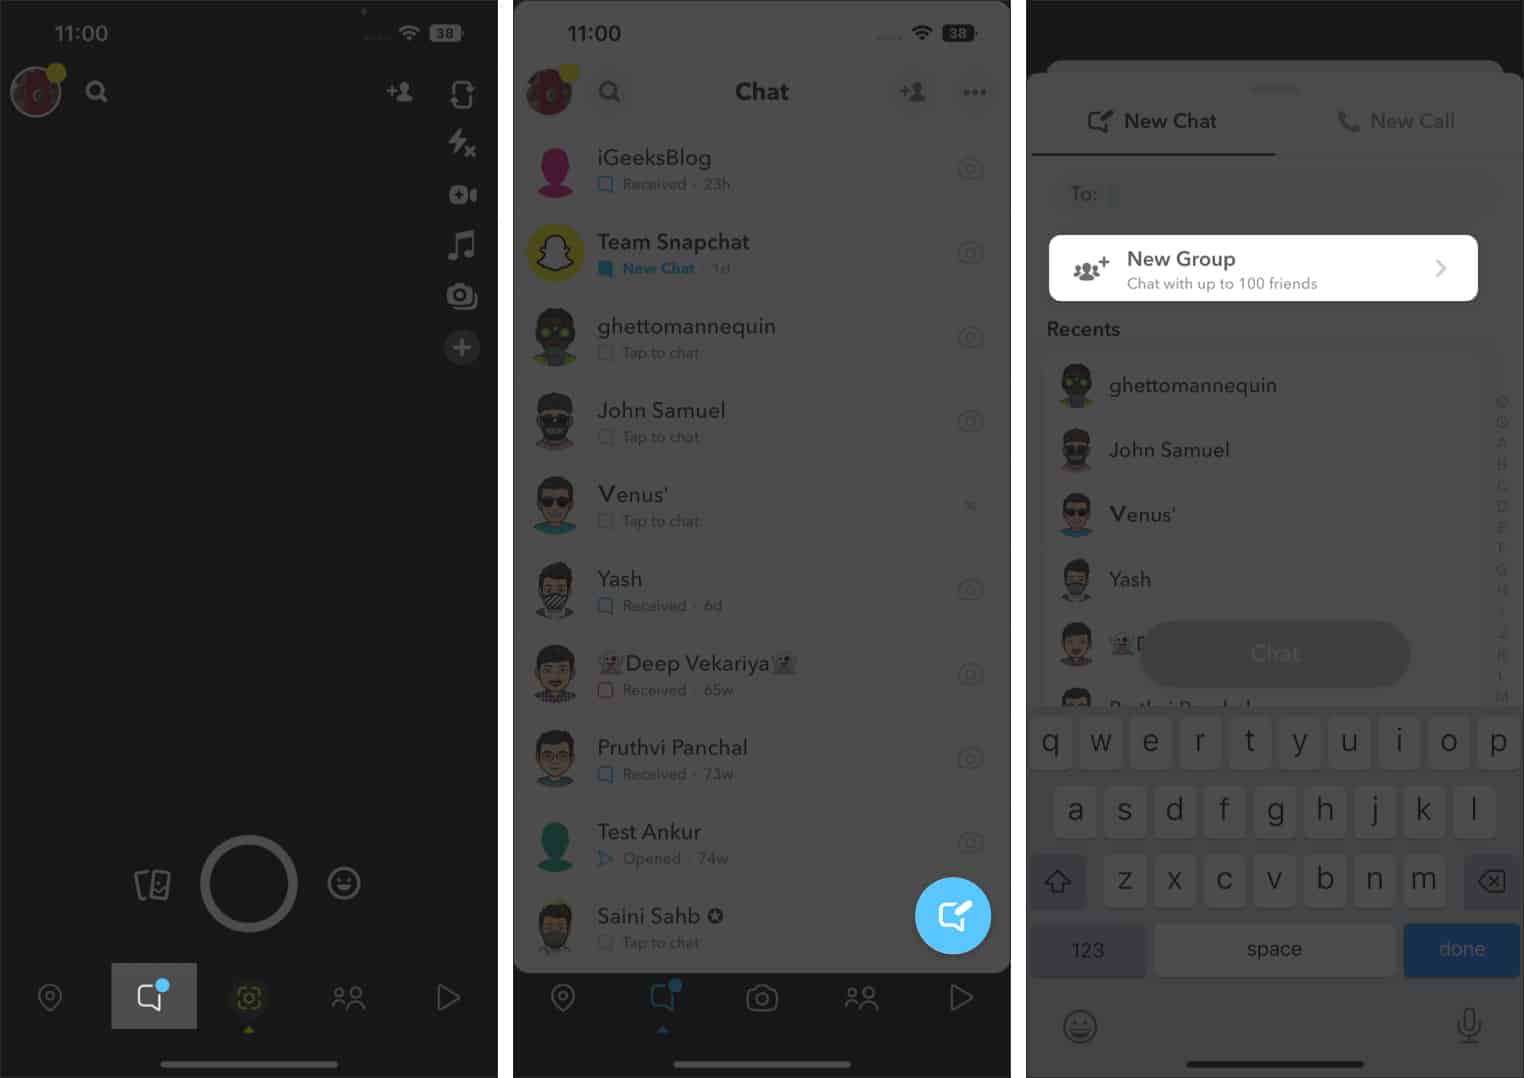 Tap New Group to create group on Snapchat